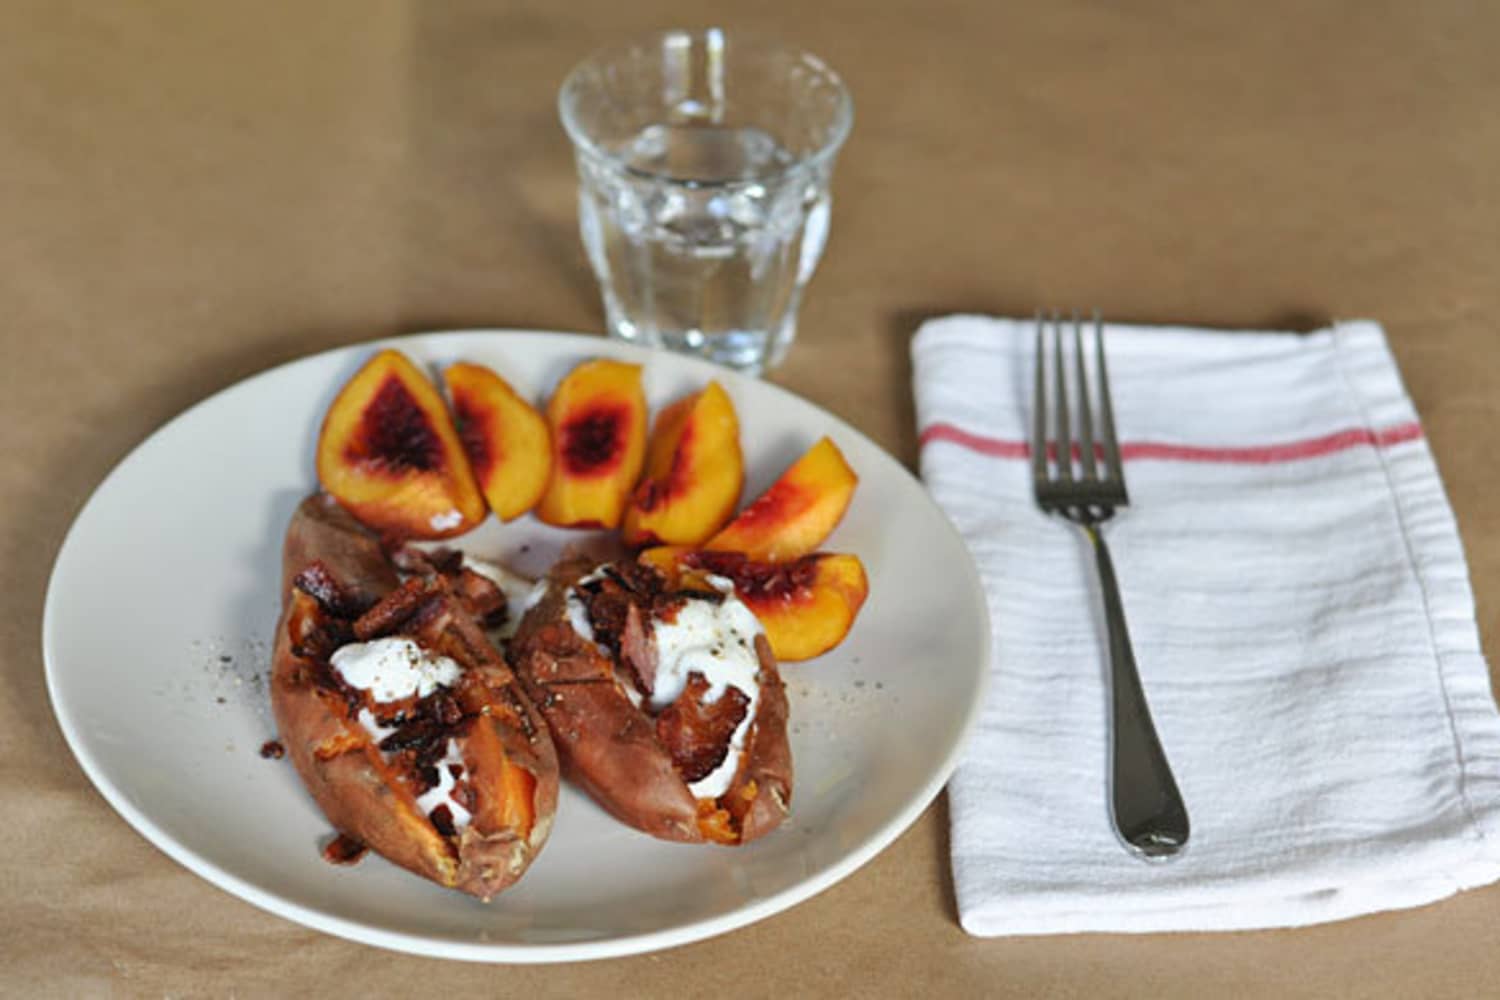 How To Turn a Baked Sweet Potato Into a Complete Meal? | Kitchn